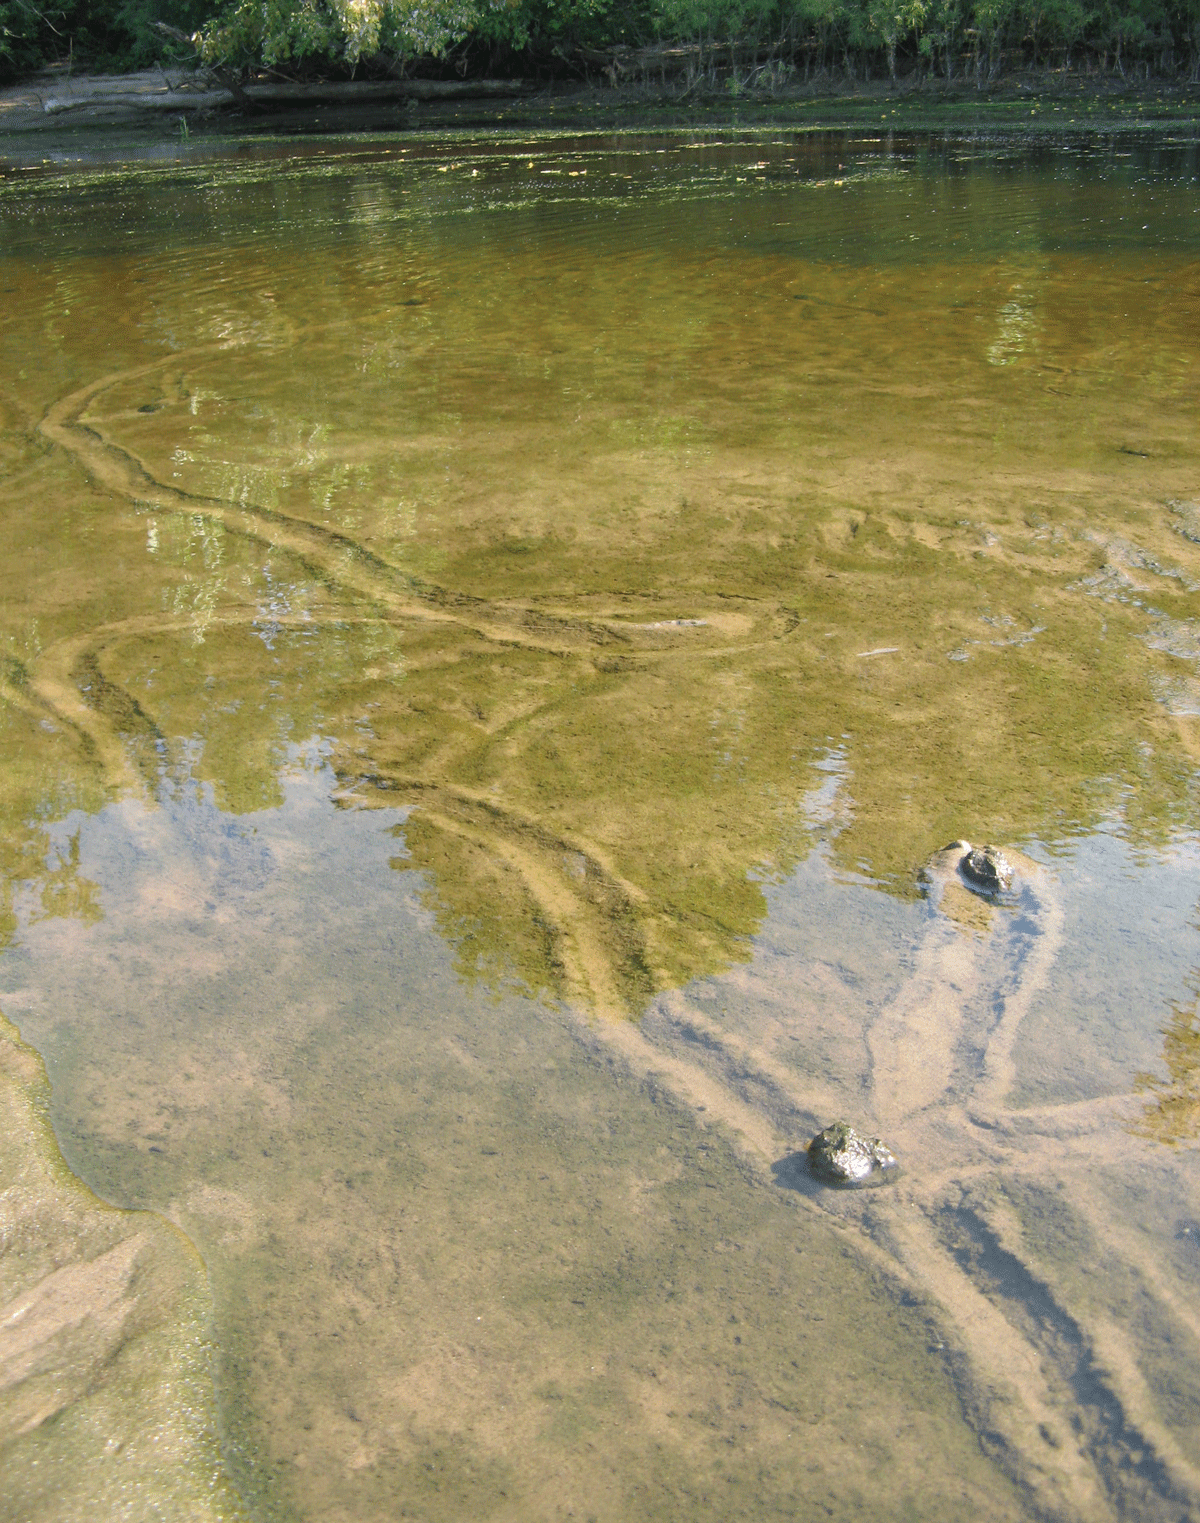 Several mussels leaving tracks in shallow water on a riverbed.